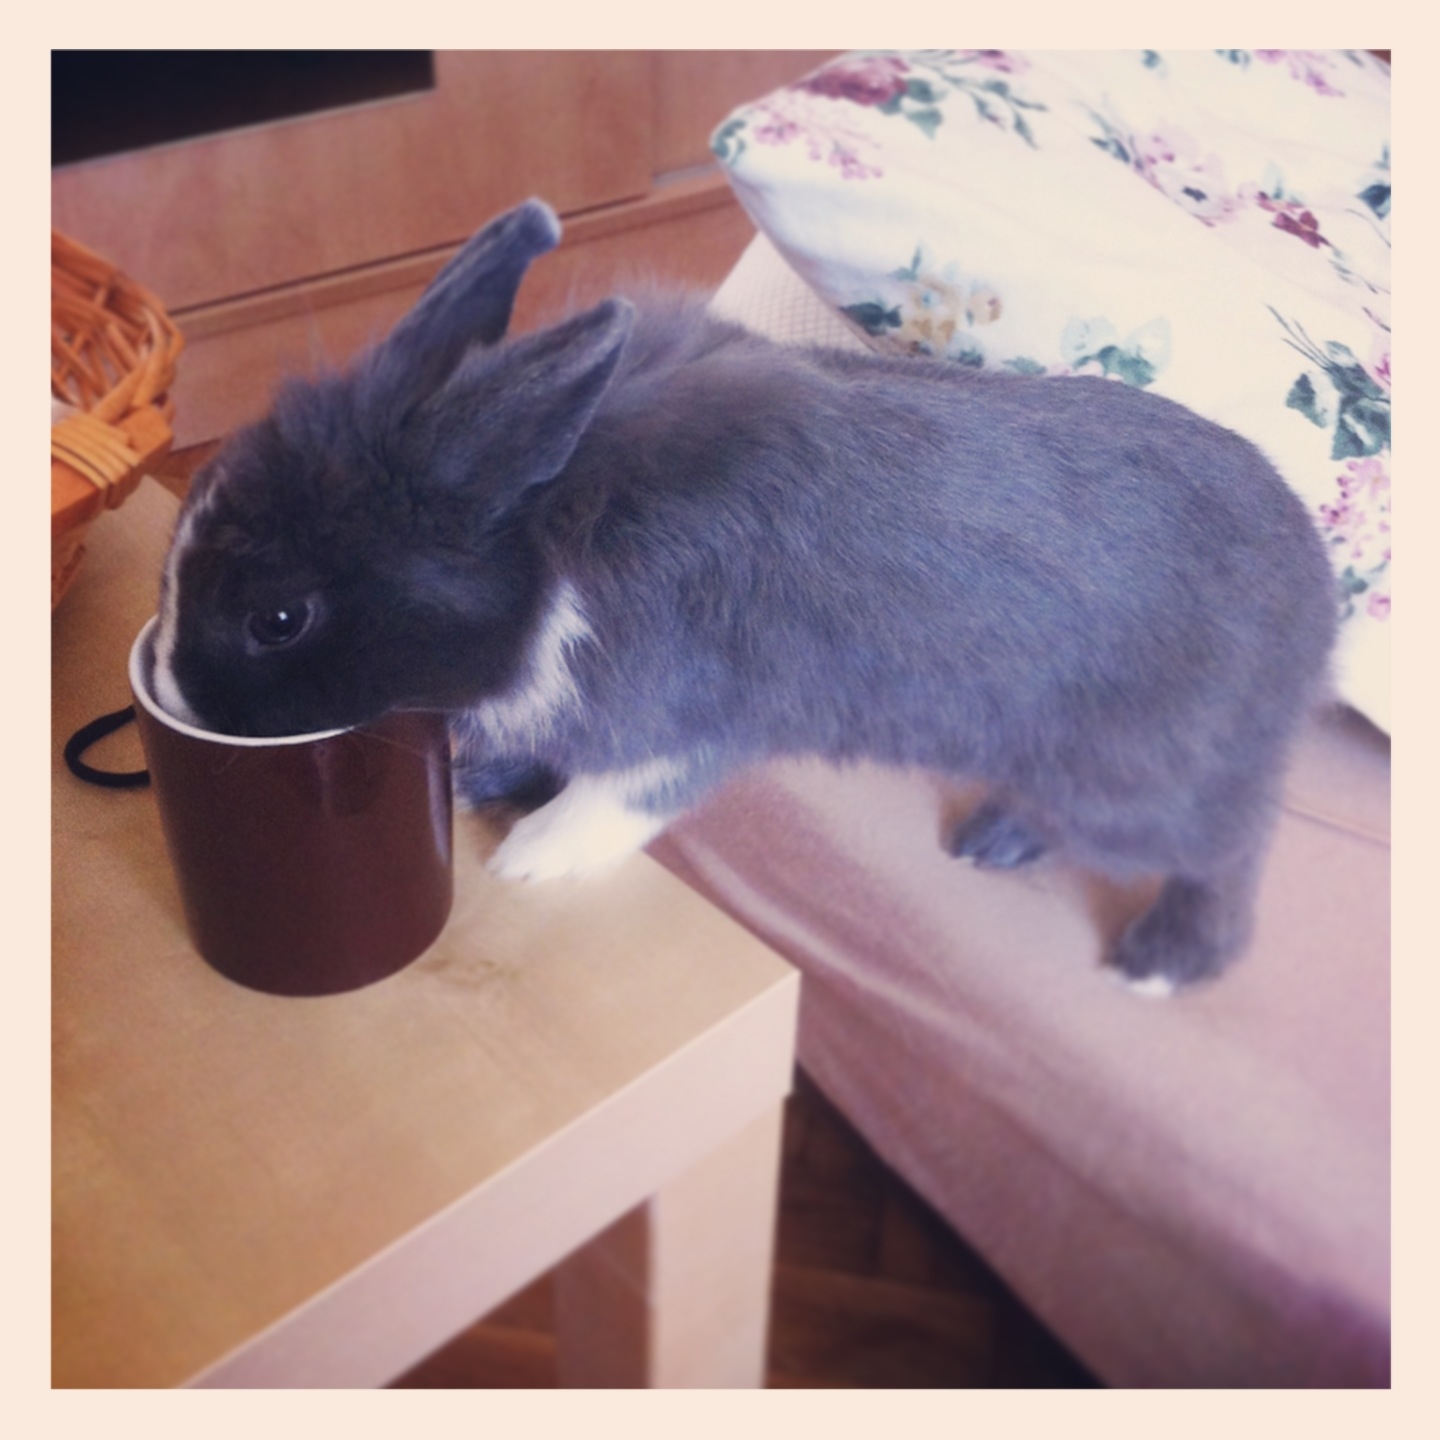 Curious Bunny Decides to Find Out What’s in Human’s Mug 2